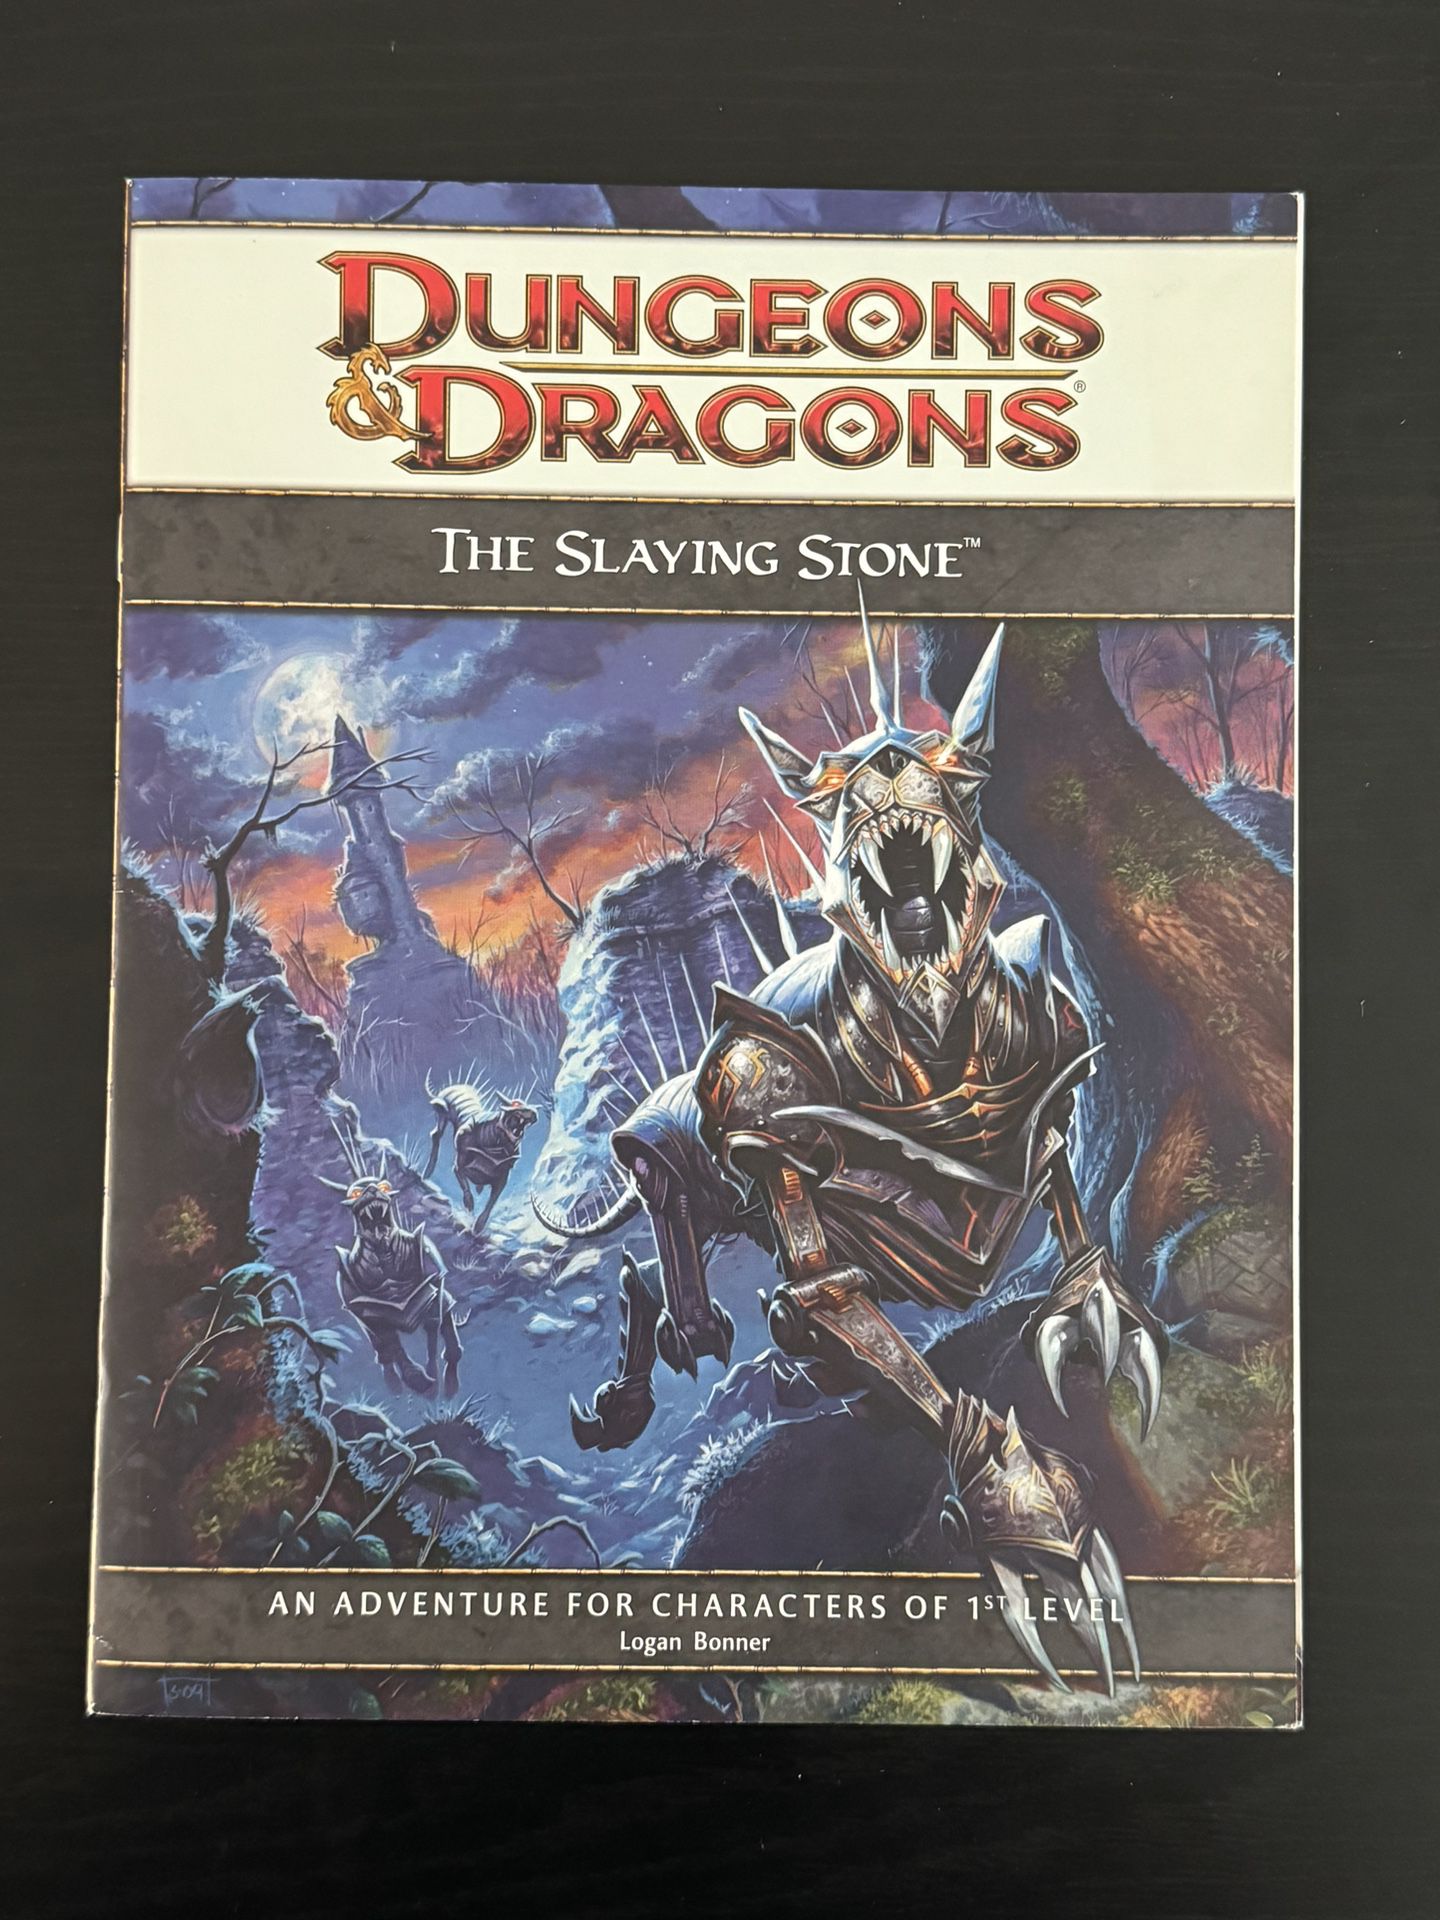 Dungeons & Dragons "The Slaying Stone" (4th Edition) 4E, 2010 Like New